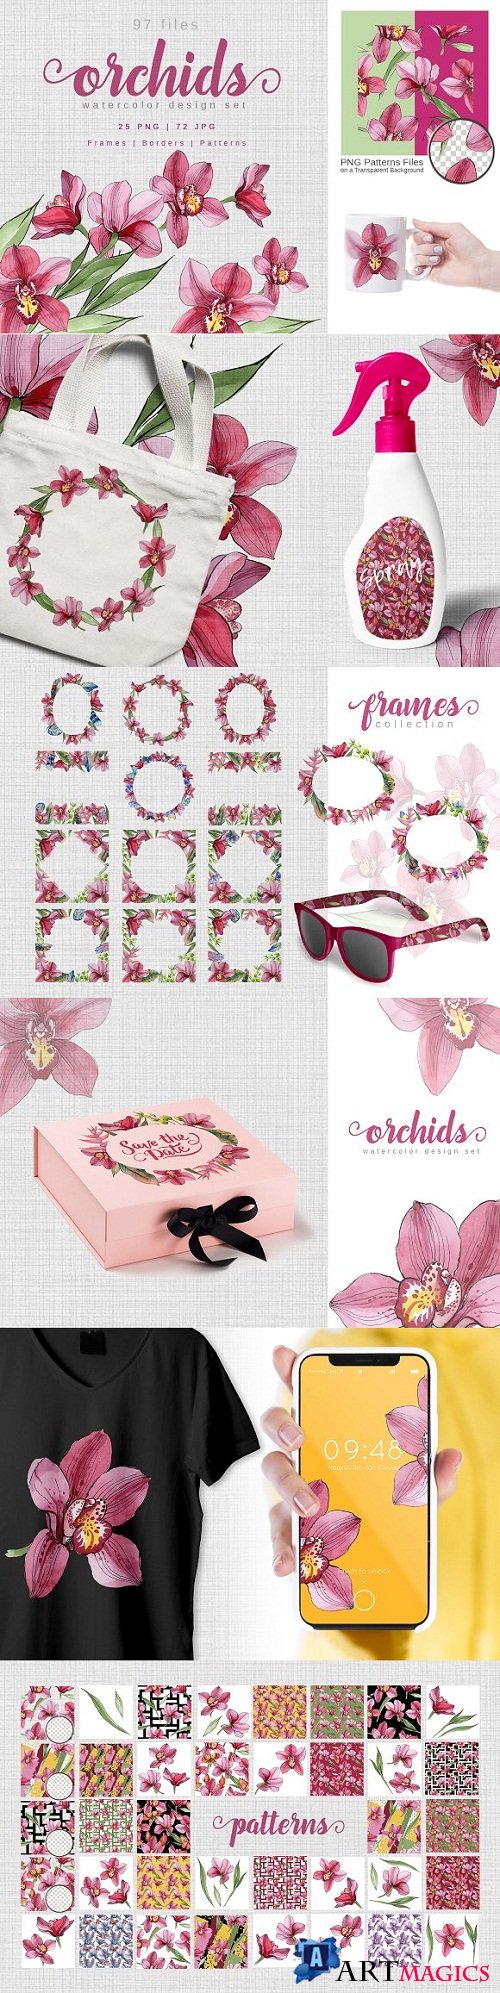 Pink Orchids Watercolor png - 3340213